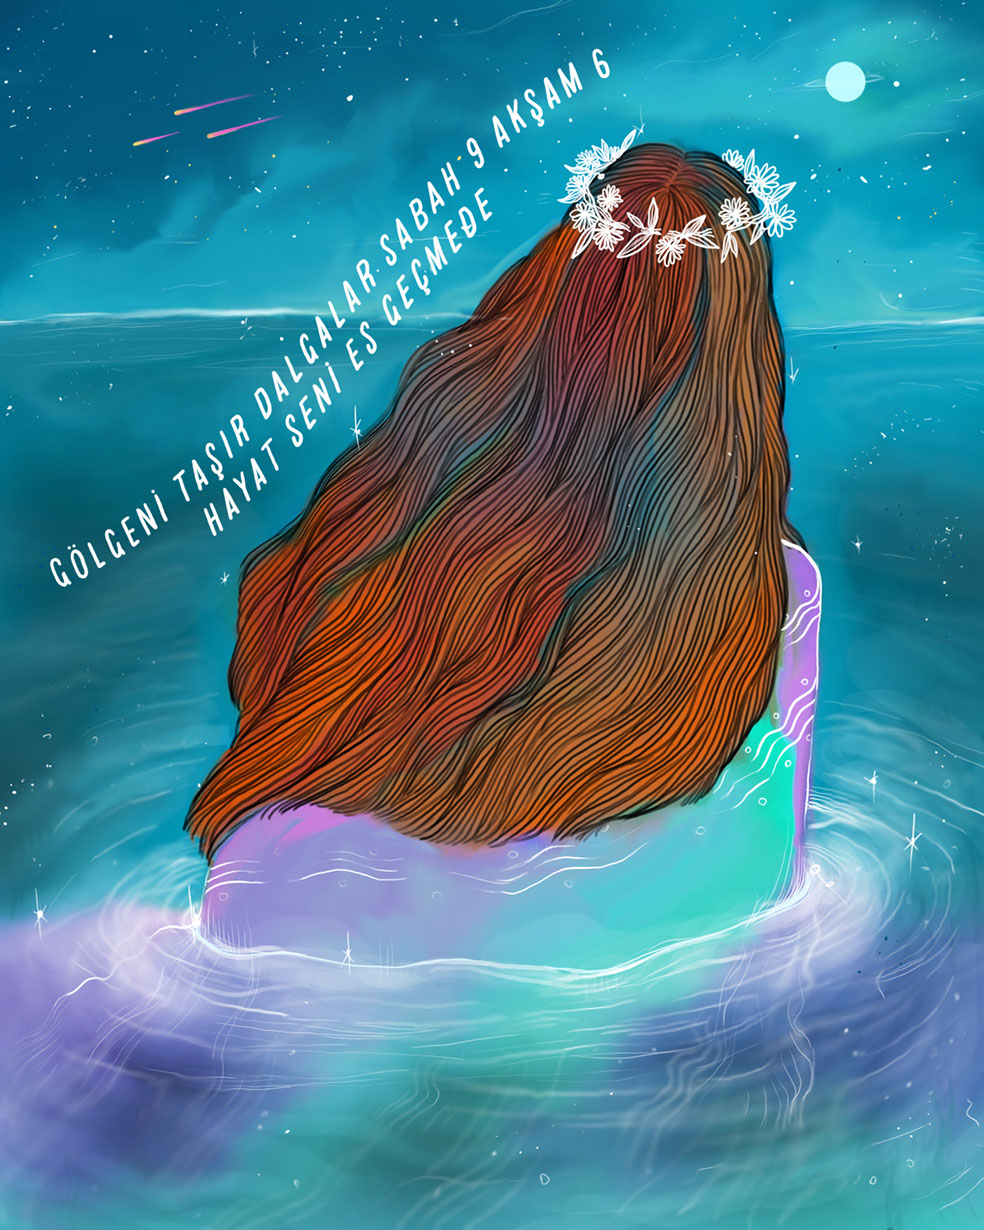 Woman wading in the ocean in moonlight under stars and meteors with flowers on her head